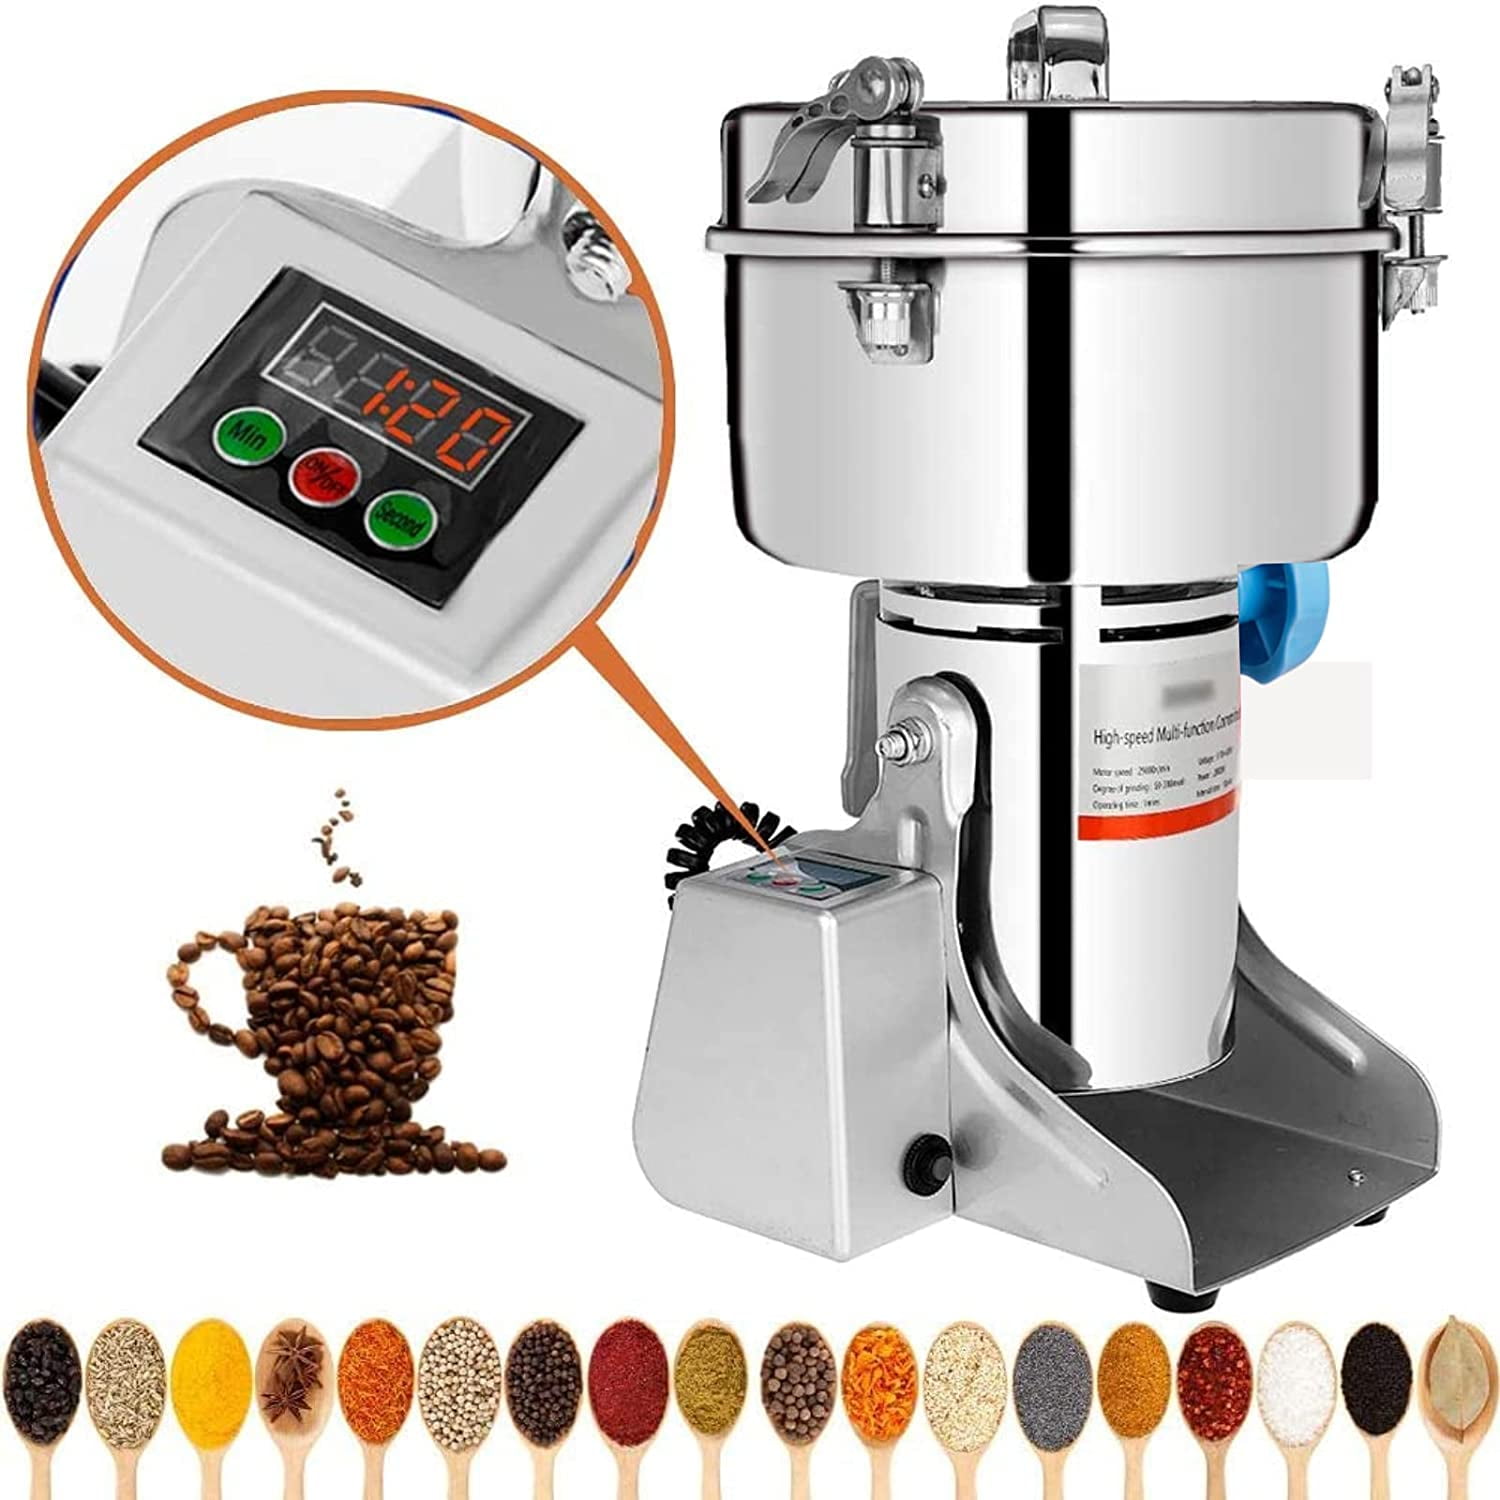 Powerful Grains Spices Grinder Cereals Coffee Dry Food Chopper Processor  Blender Pepper Mill Grinding Machine Home Kitchen Tools